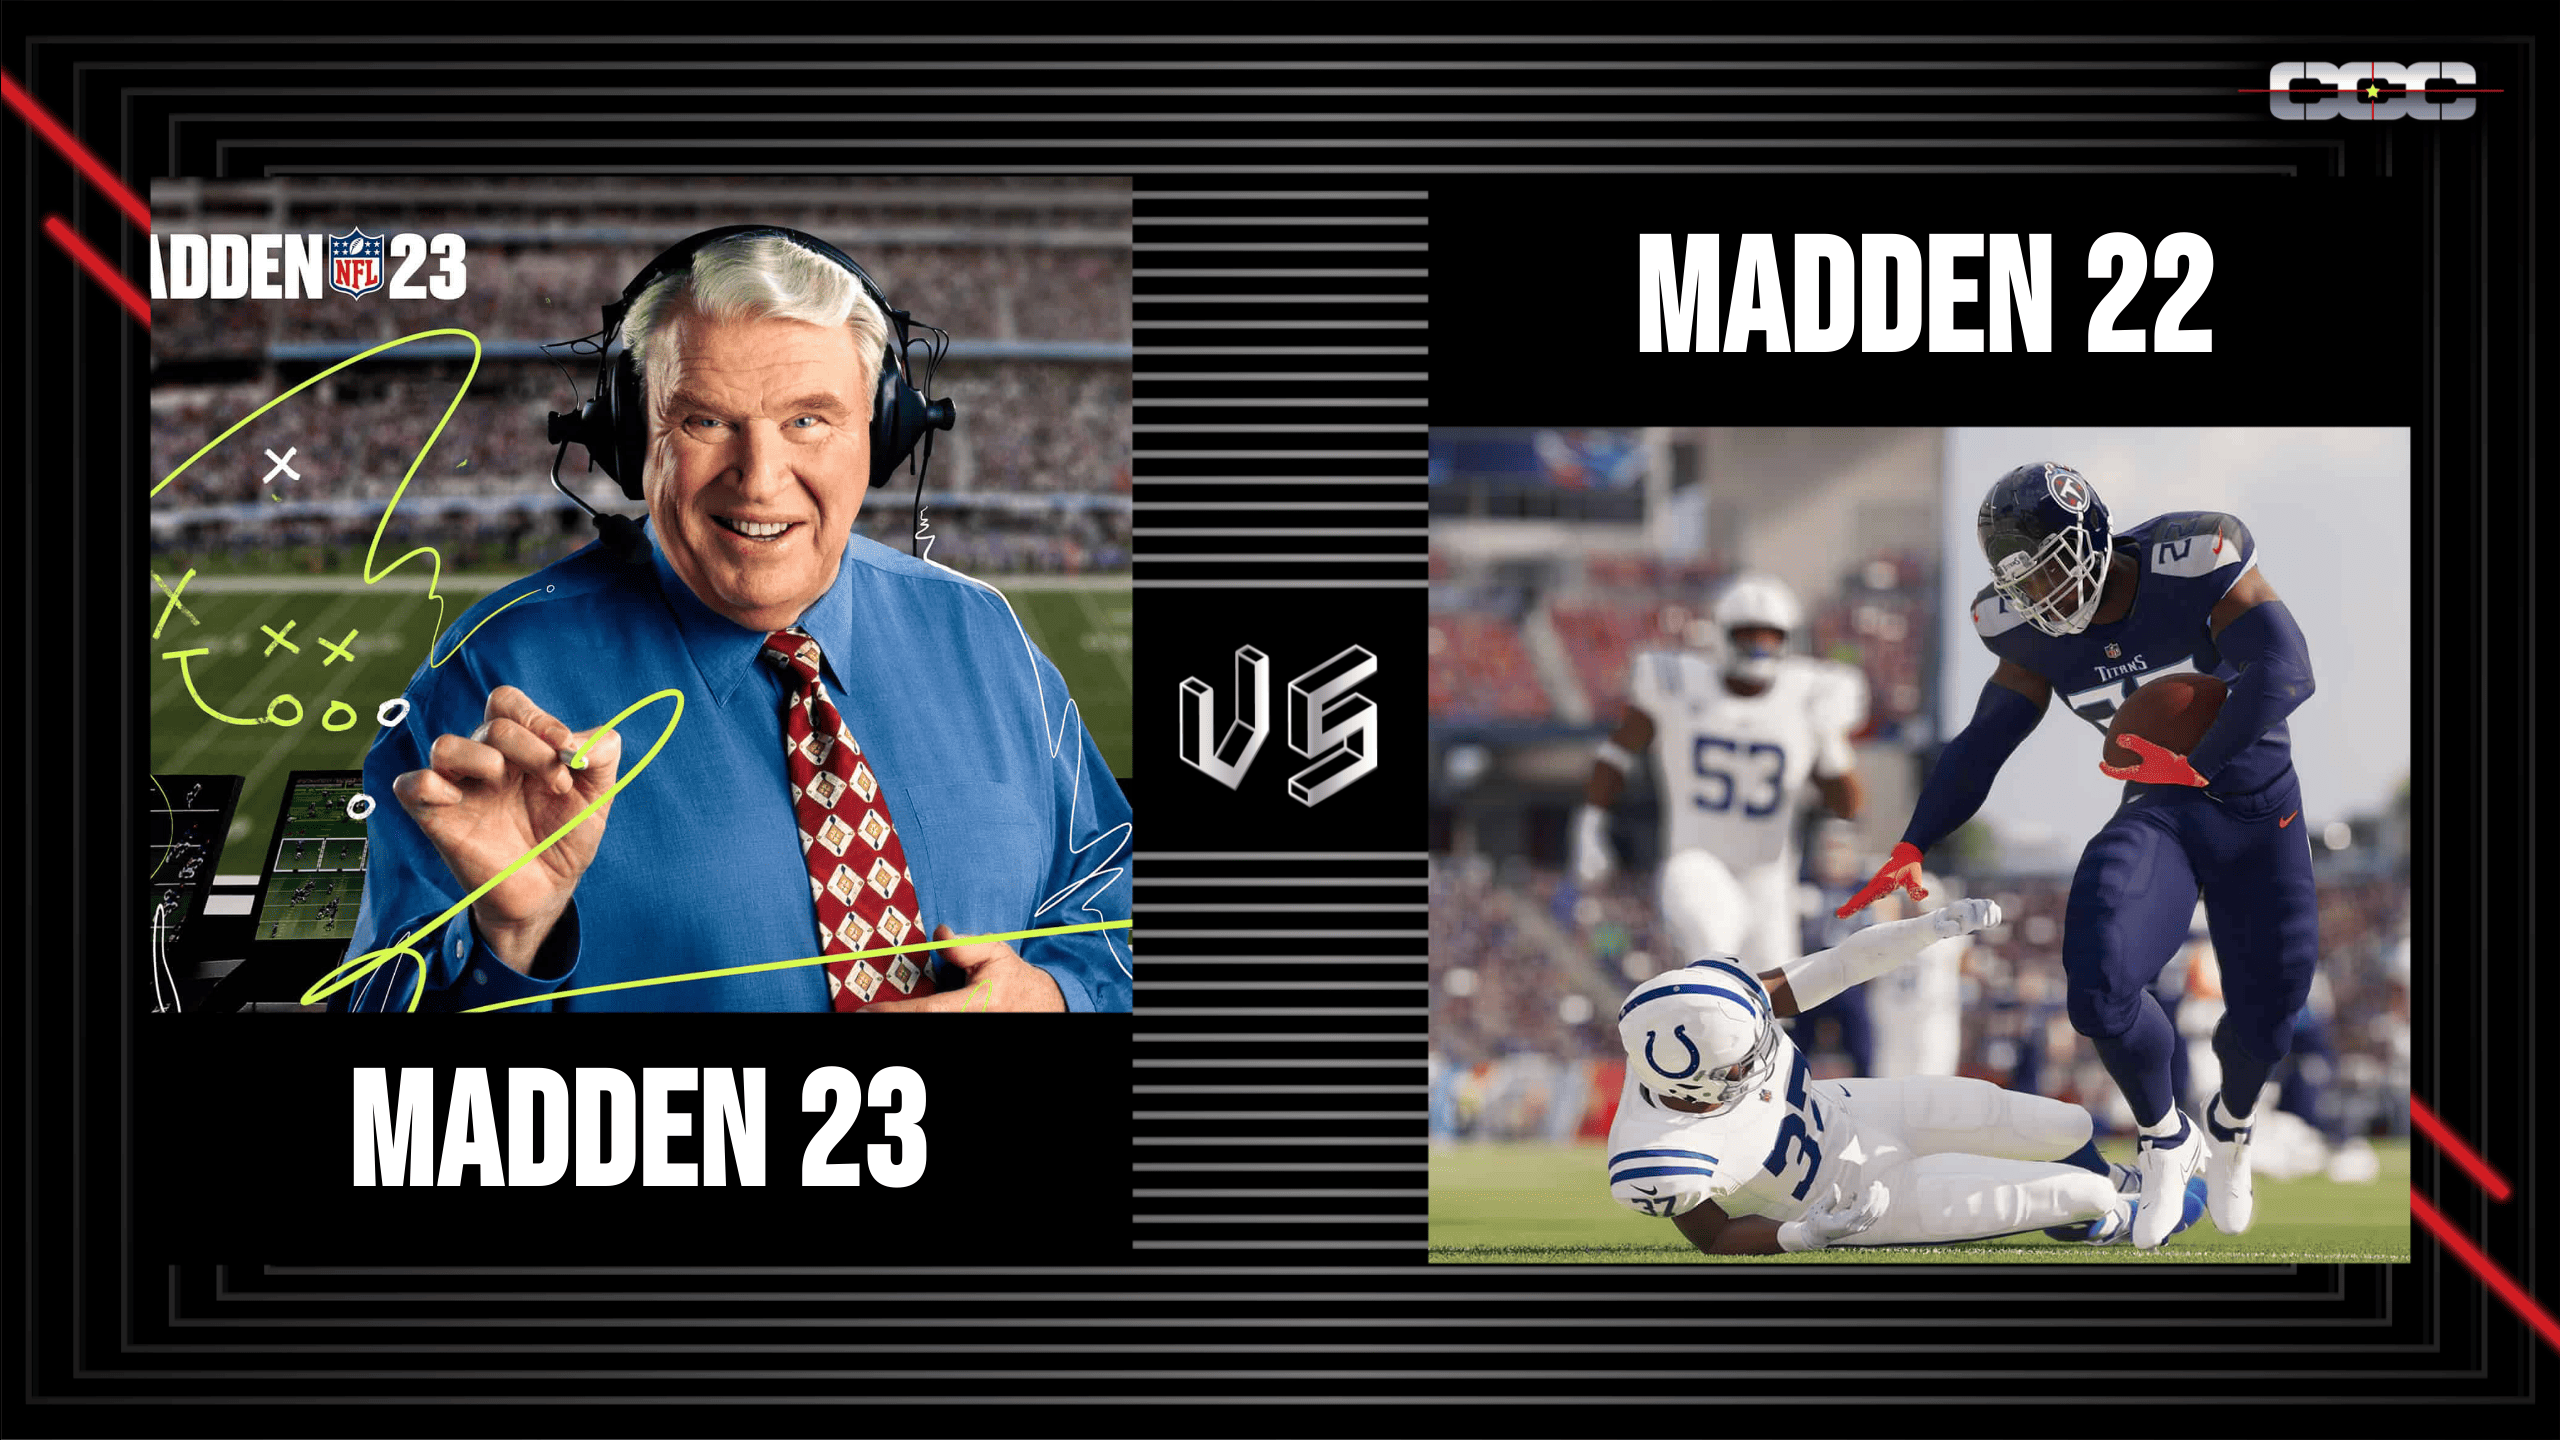 Madden 22 vs Madden 23: What Are The Differences? - Cheat Code Central